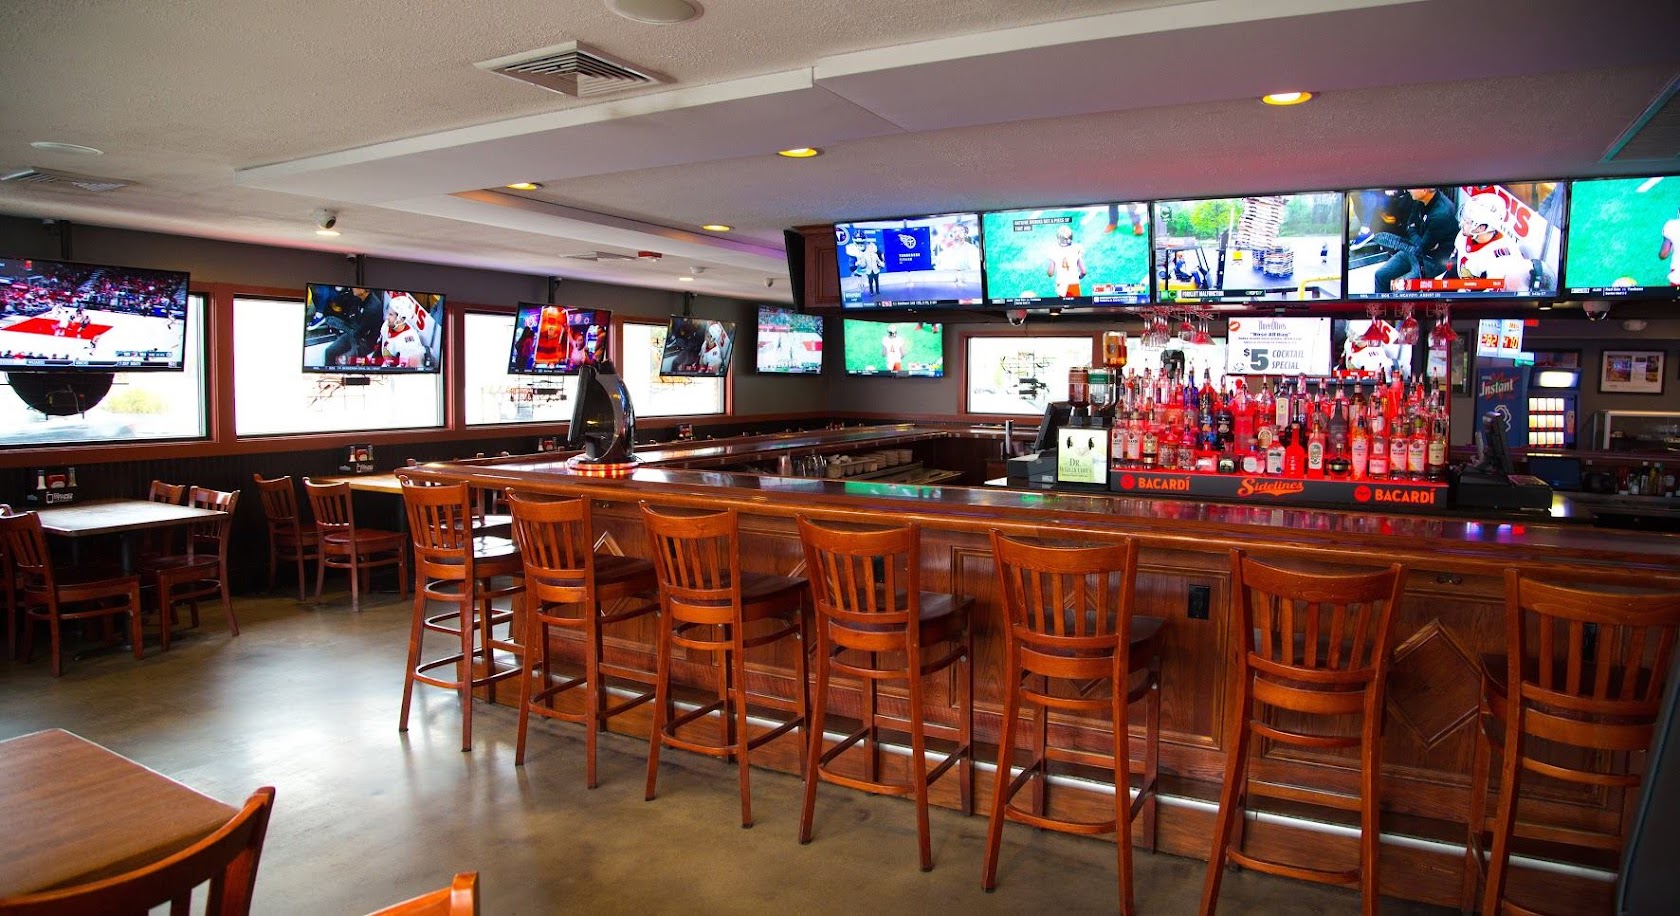 Sidelines Sports Bar & Grill